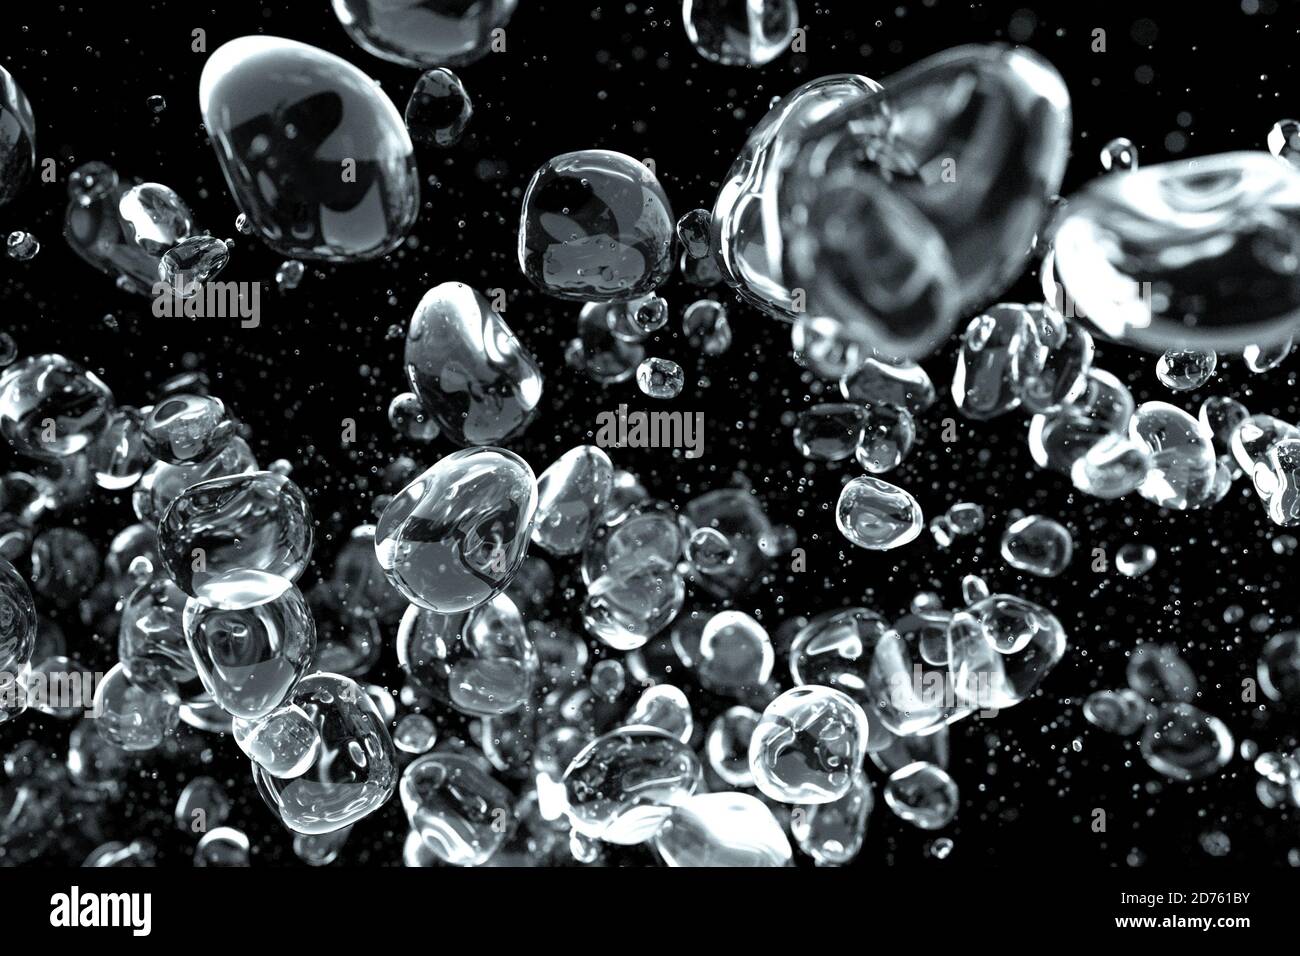 Water Bubbles Against Black Background Stock Photo - Alamy